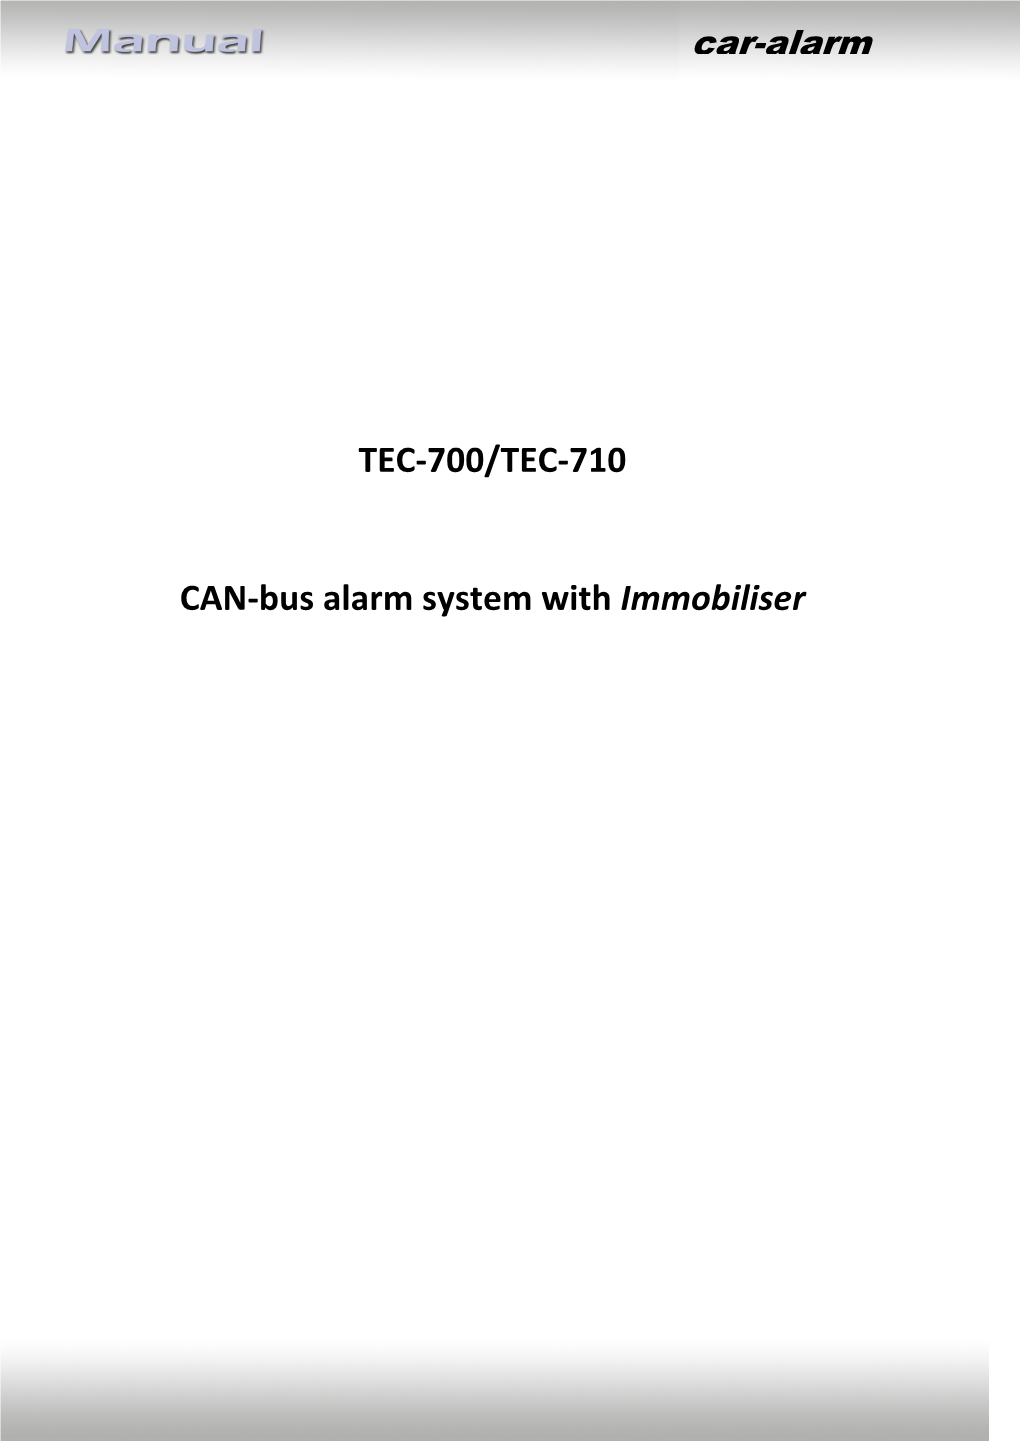 TEC-700/TEC-710 CAN-Bus Alarm System with Immobiliser